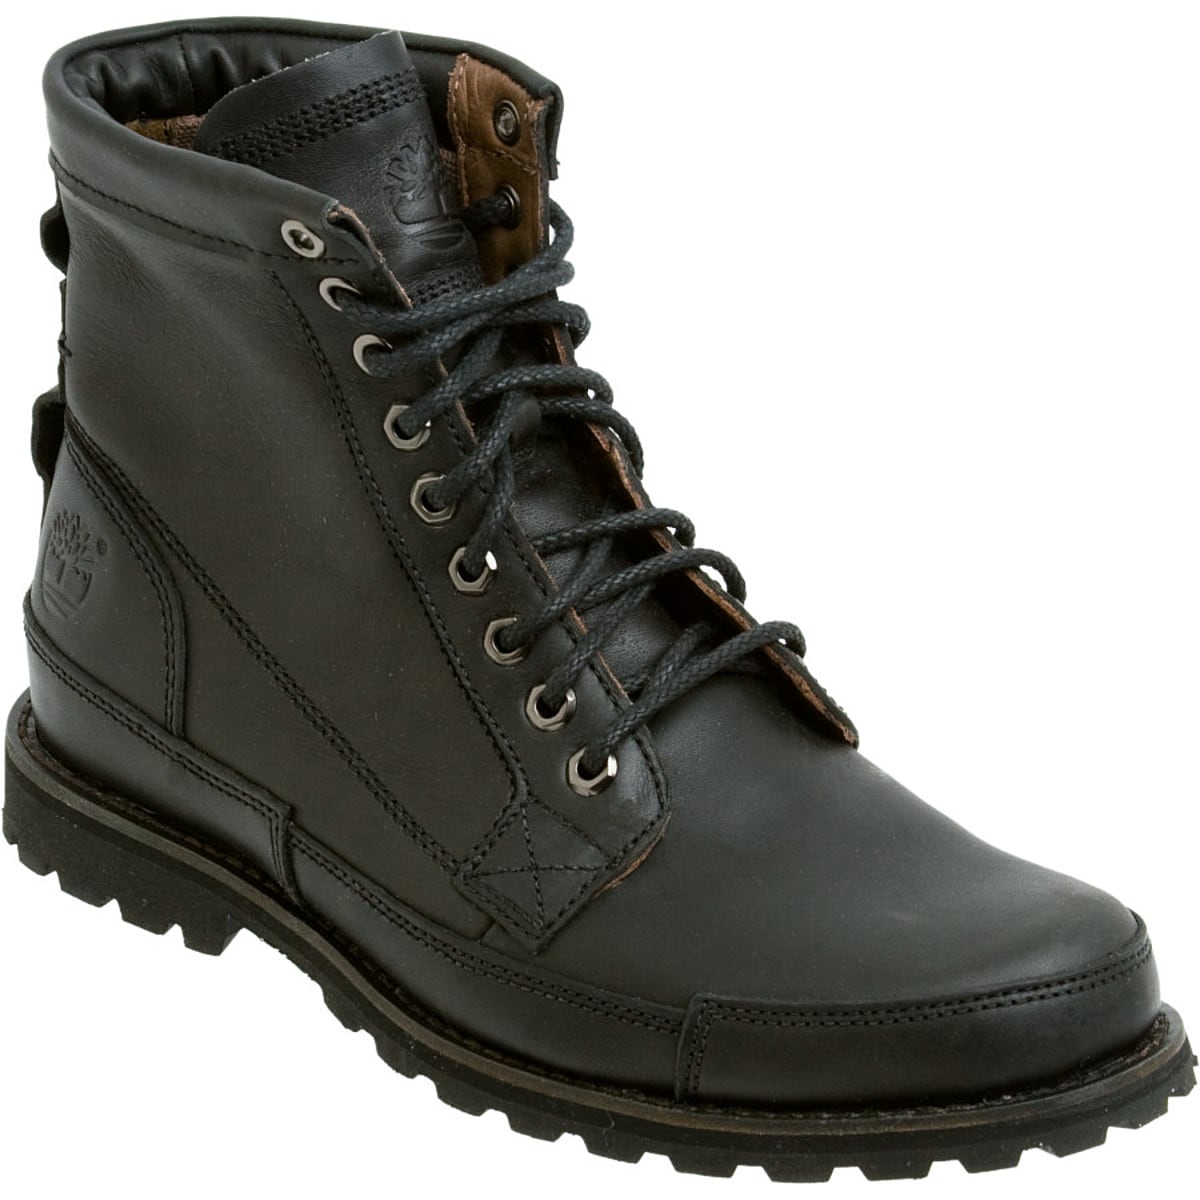 Giotto Dibondon violación Presidente Timberland Earthkeepers Rugged Originals Leather 6in Boot - Men's - Footwear